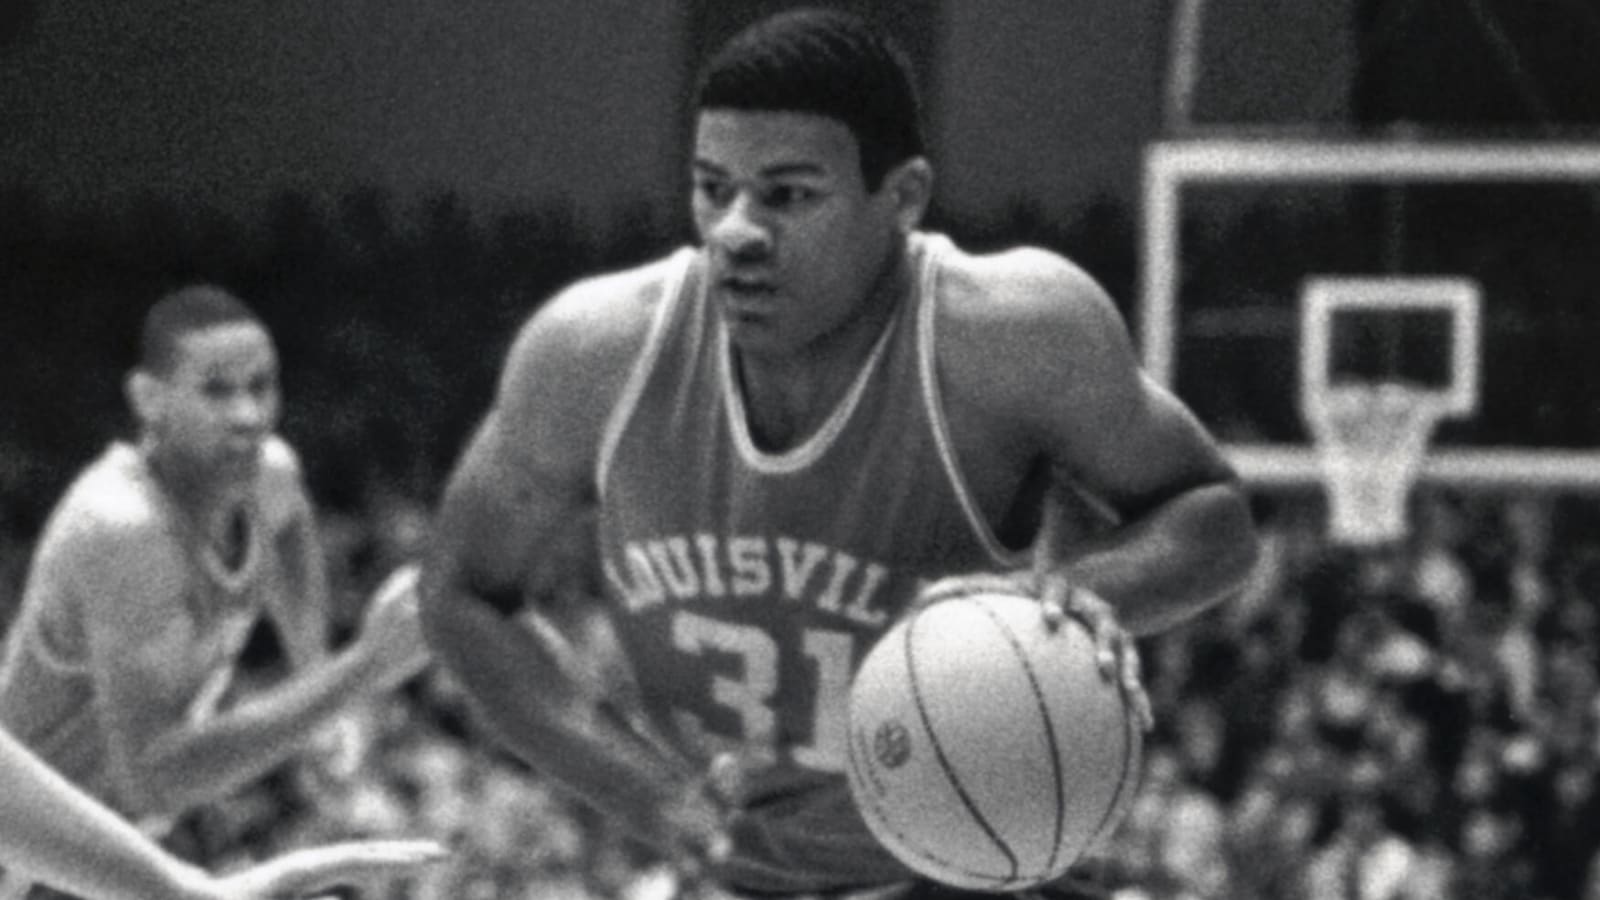 The greatest players in Louisville men's basketball history